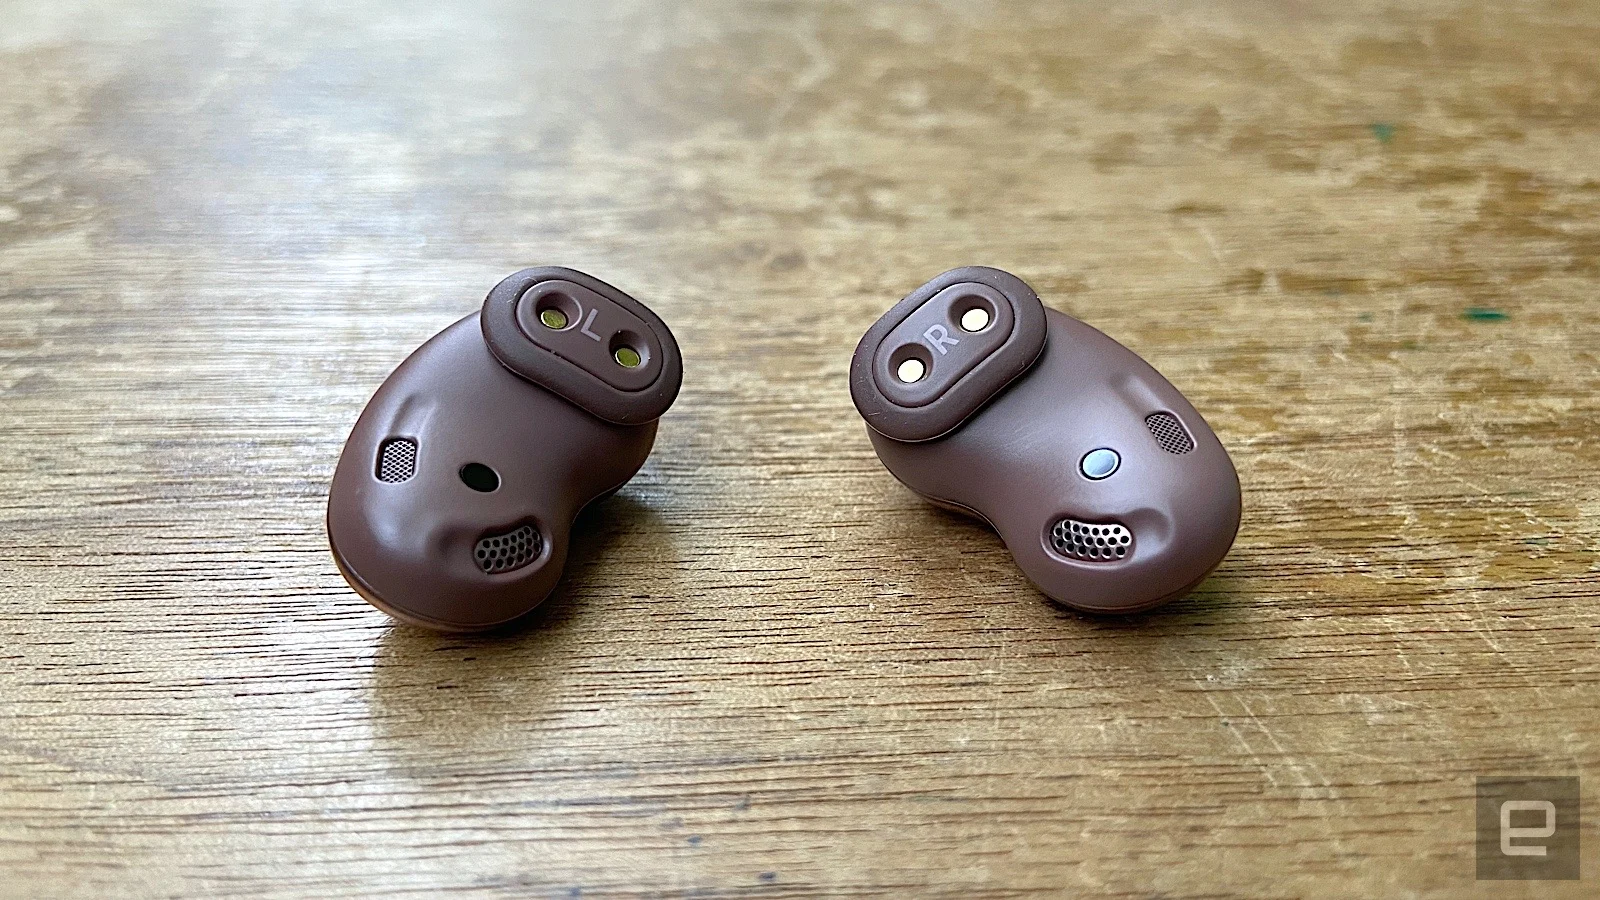 Samsung’s latest true wireless earbuds have a unique “open type” design that will keep you from cramming them in your ears. While that does make them a bit more comfortable, you do have to sacrifice sound quality and the effectiveness of ANC. There are some attractive features here, but the company’s Galaxy Buds+ are the better option at this point. 